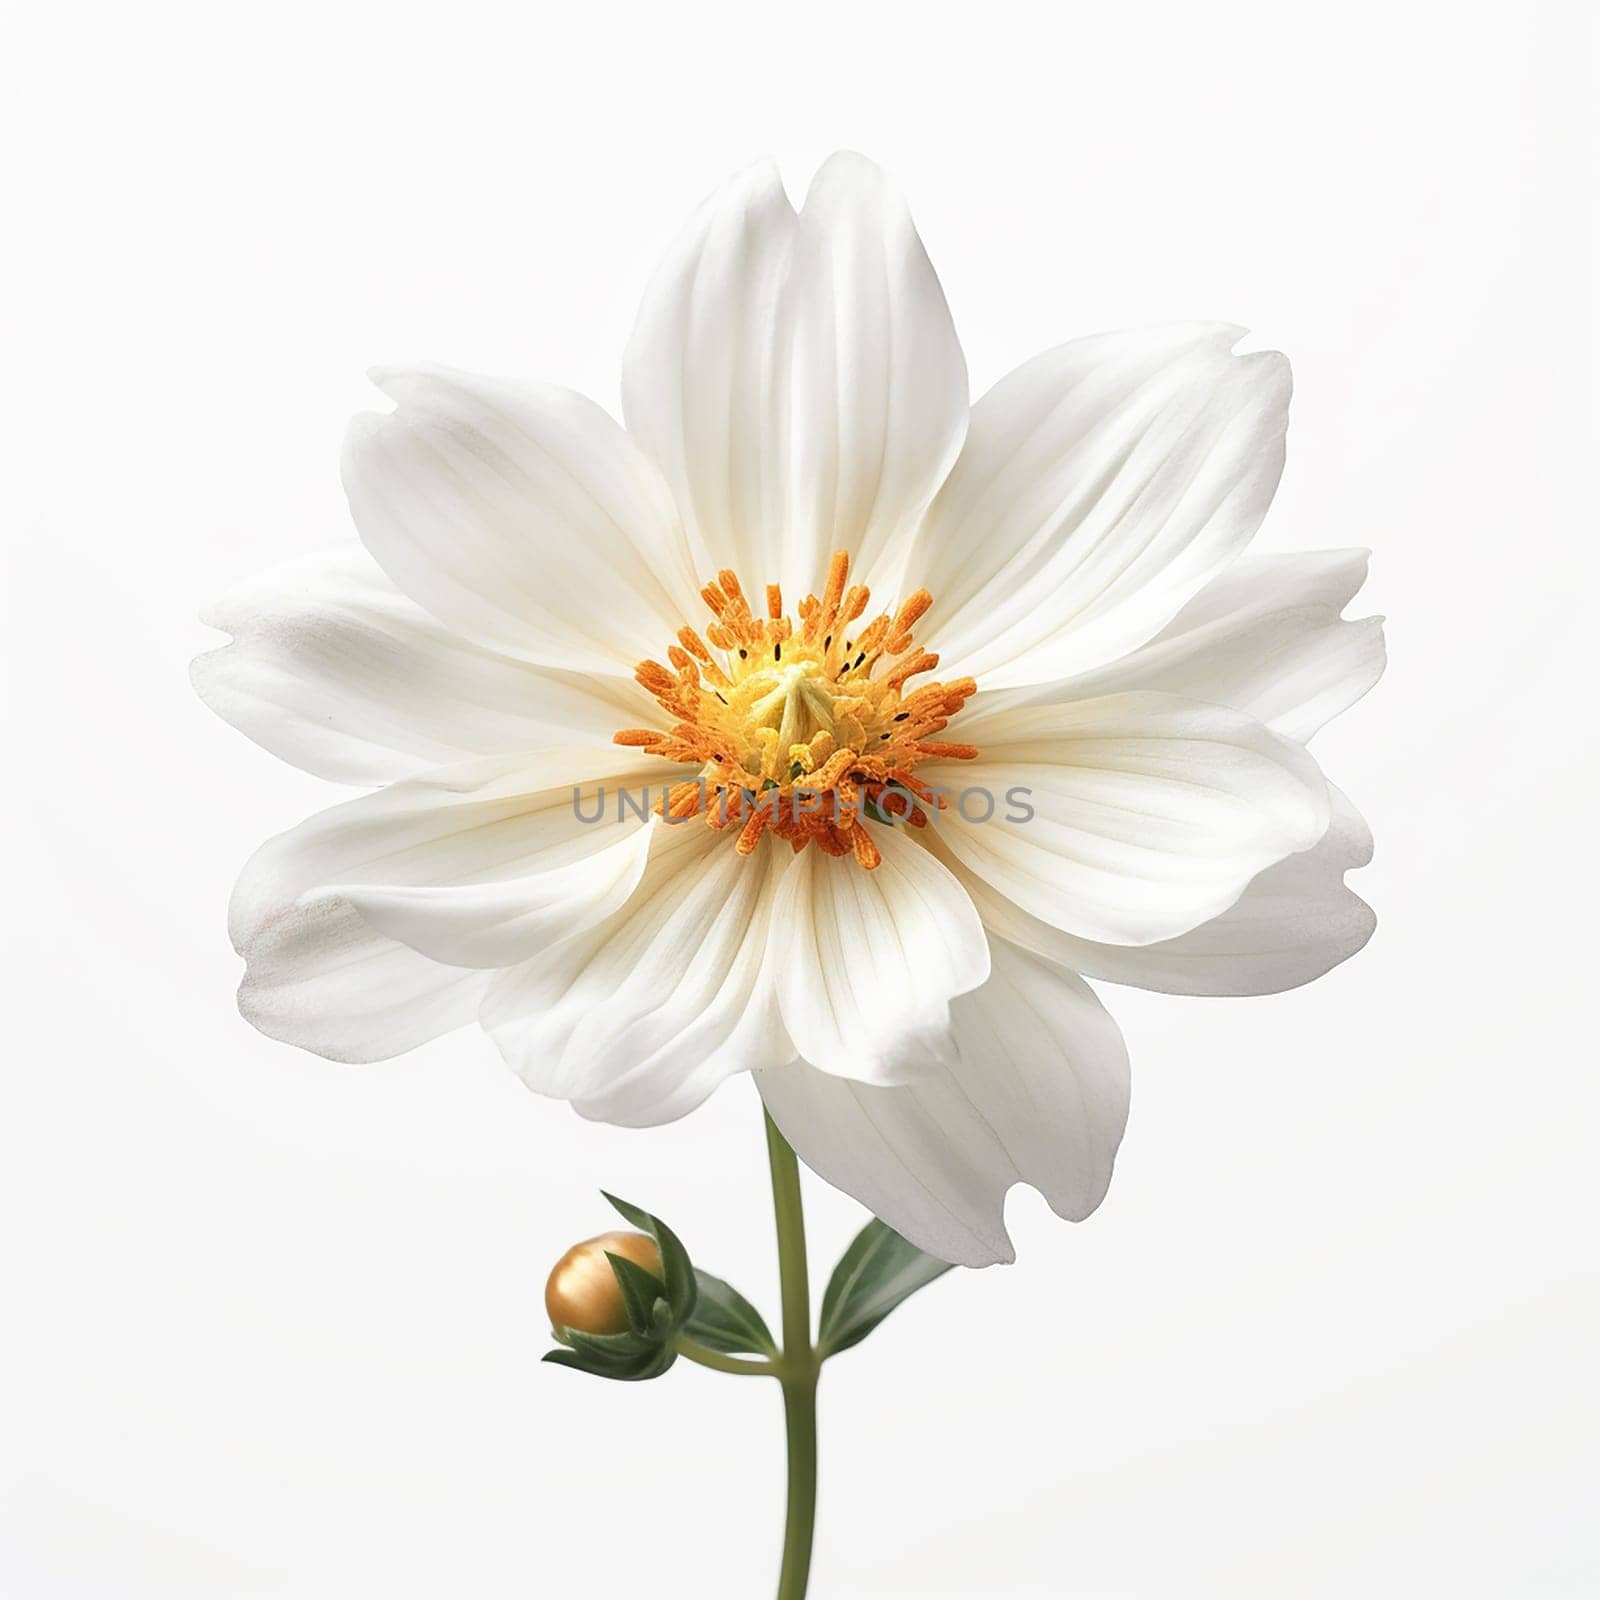 A single white flower with yellow stamens against a plain background. by Hype2art